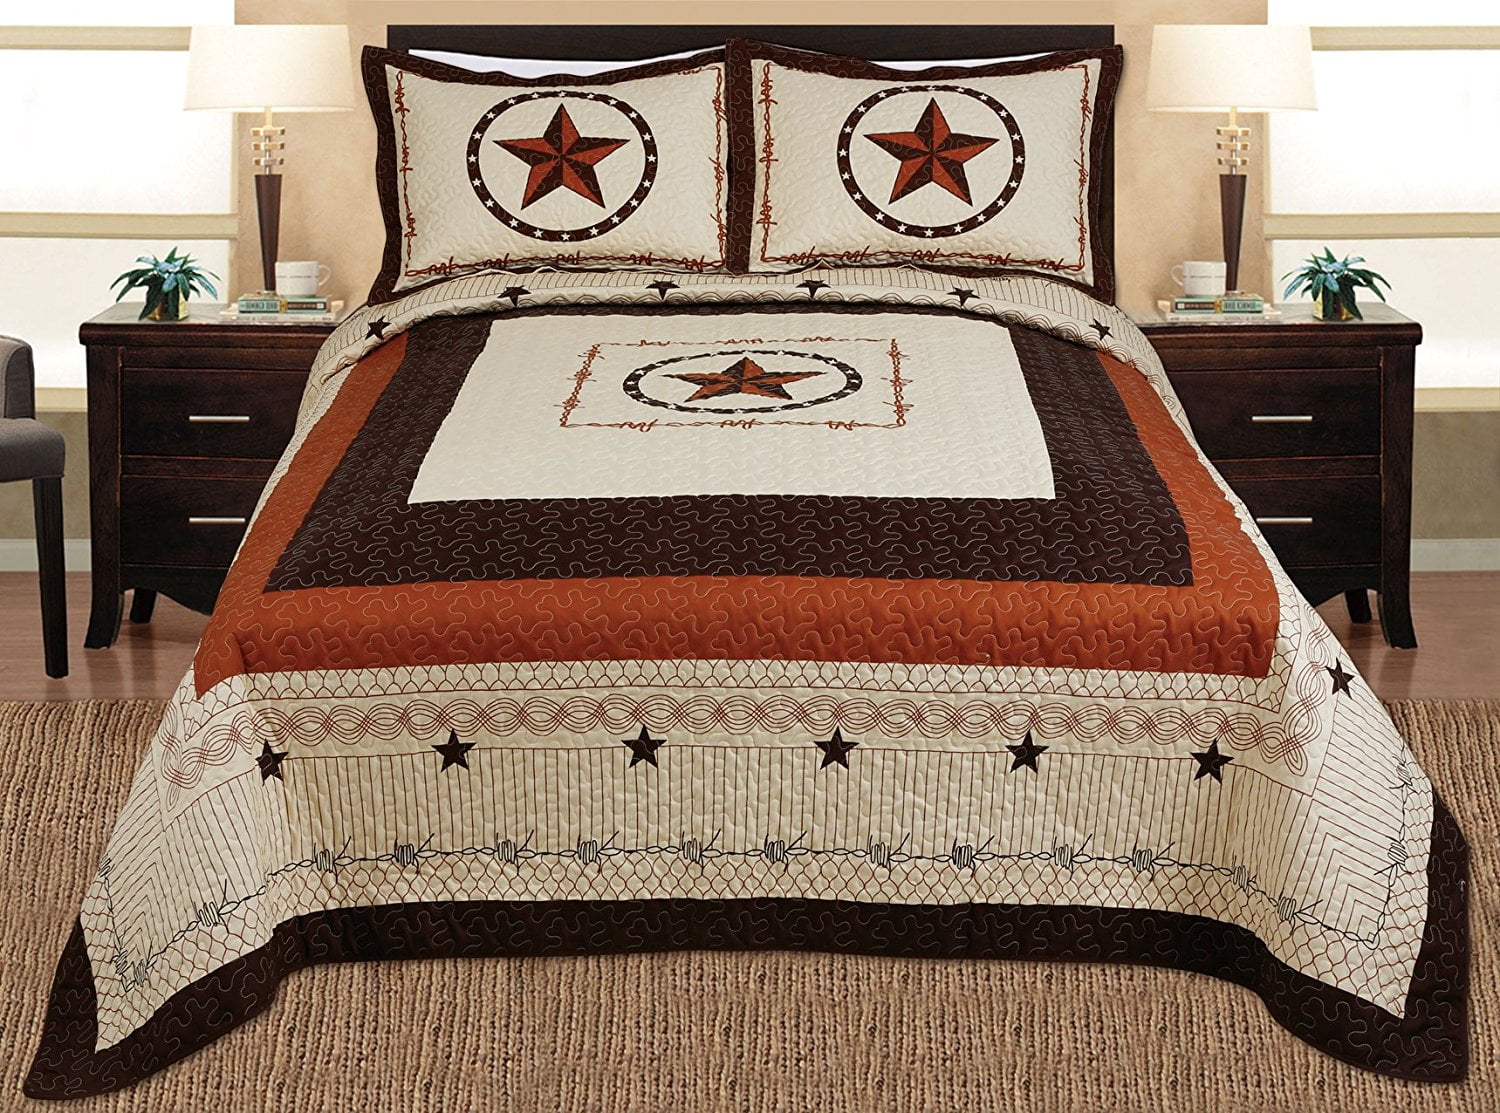 Details about   COZY CABIN LOG LODGE SOUTHWEST WESTERN COUNTRY BLUE TAN RUST RED BROWN QUILT SET 